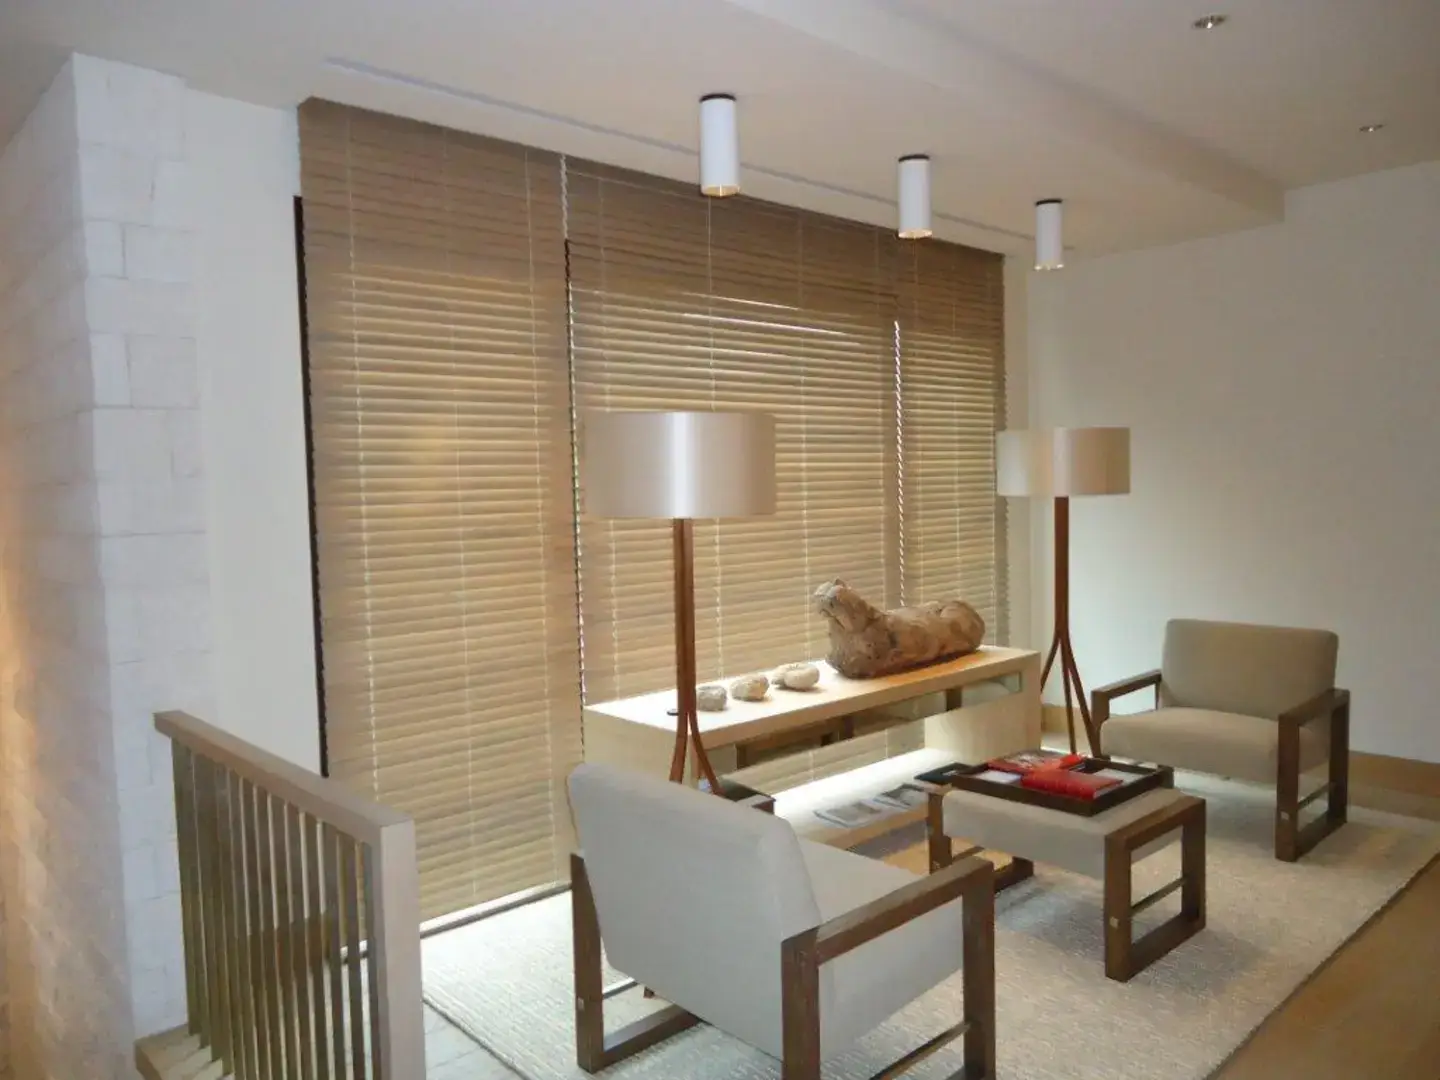 Custom wooden blinds in the living room of a modern, luxurious home.